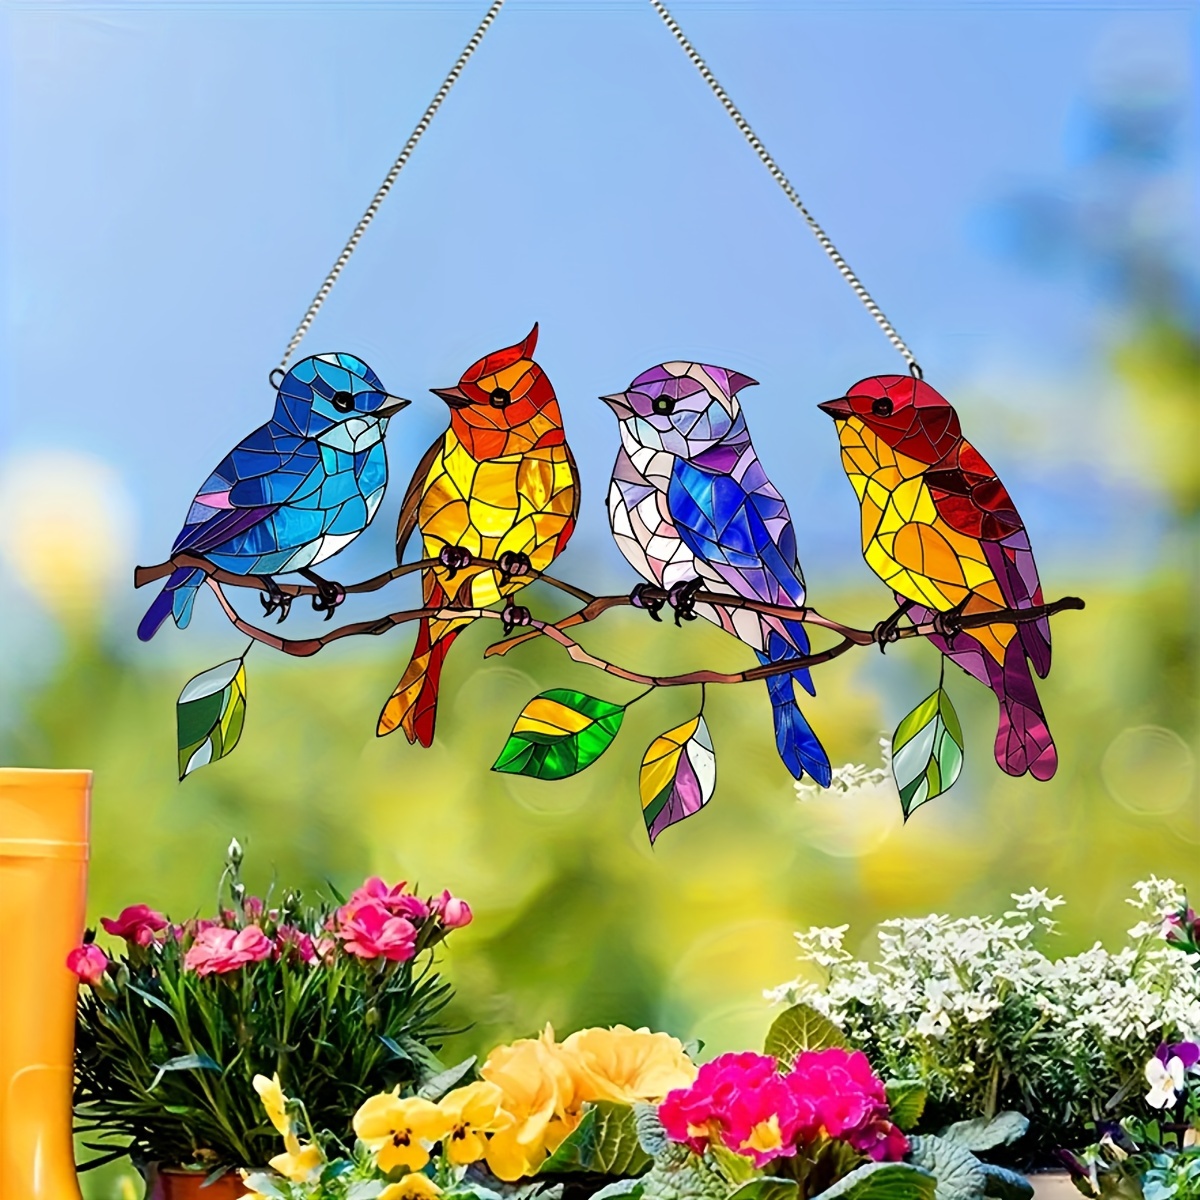 

Glam Style Acrylic Bird Suncatcher - 1pc Wall Hanging Decorative Sign & Plaque With Colorful Stained Glass Look, 4 Birds On A Branch Theme, Multipurpose For Home And Garden Decor